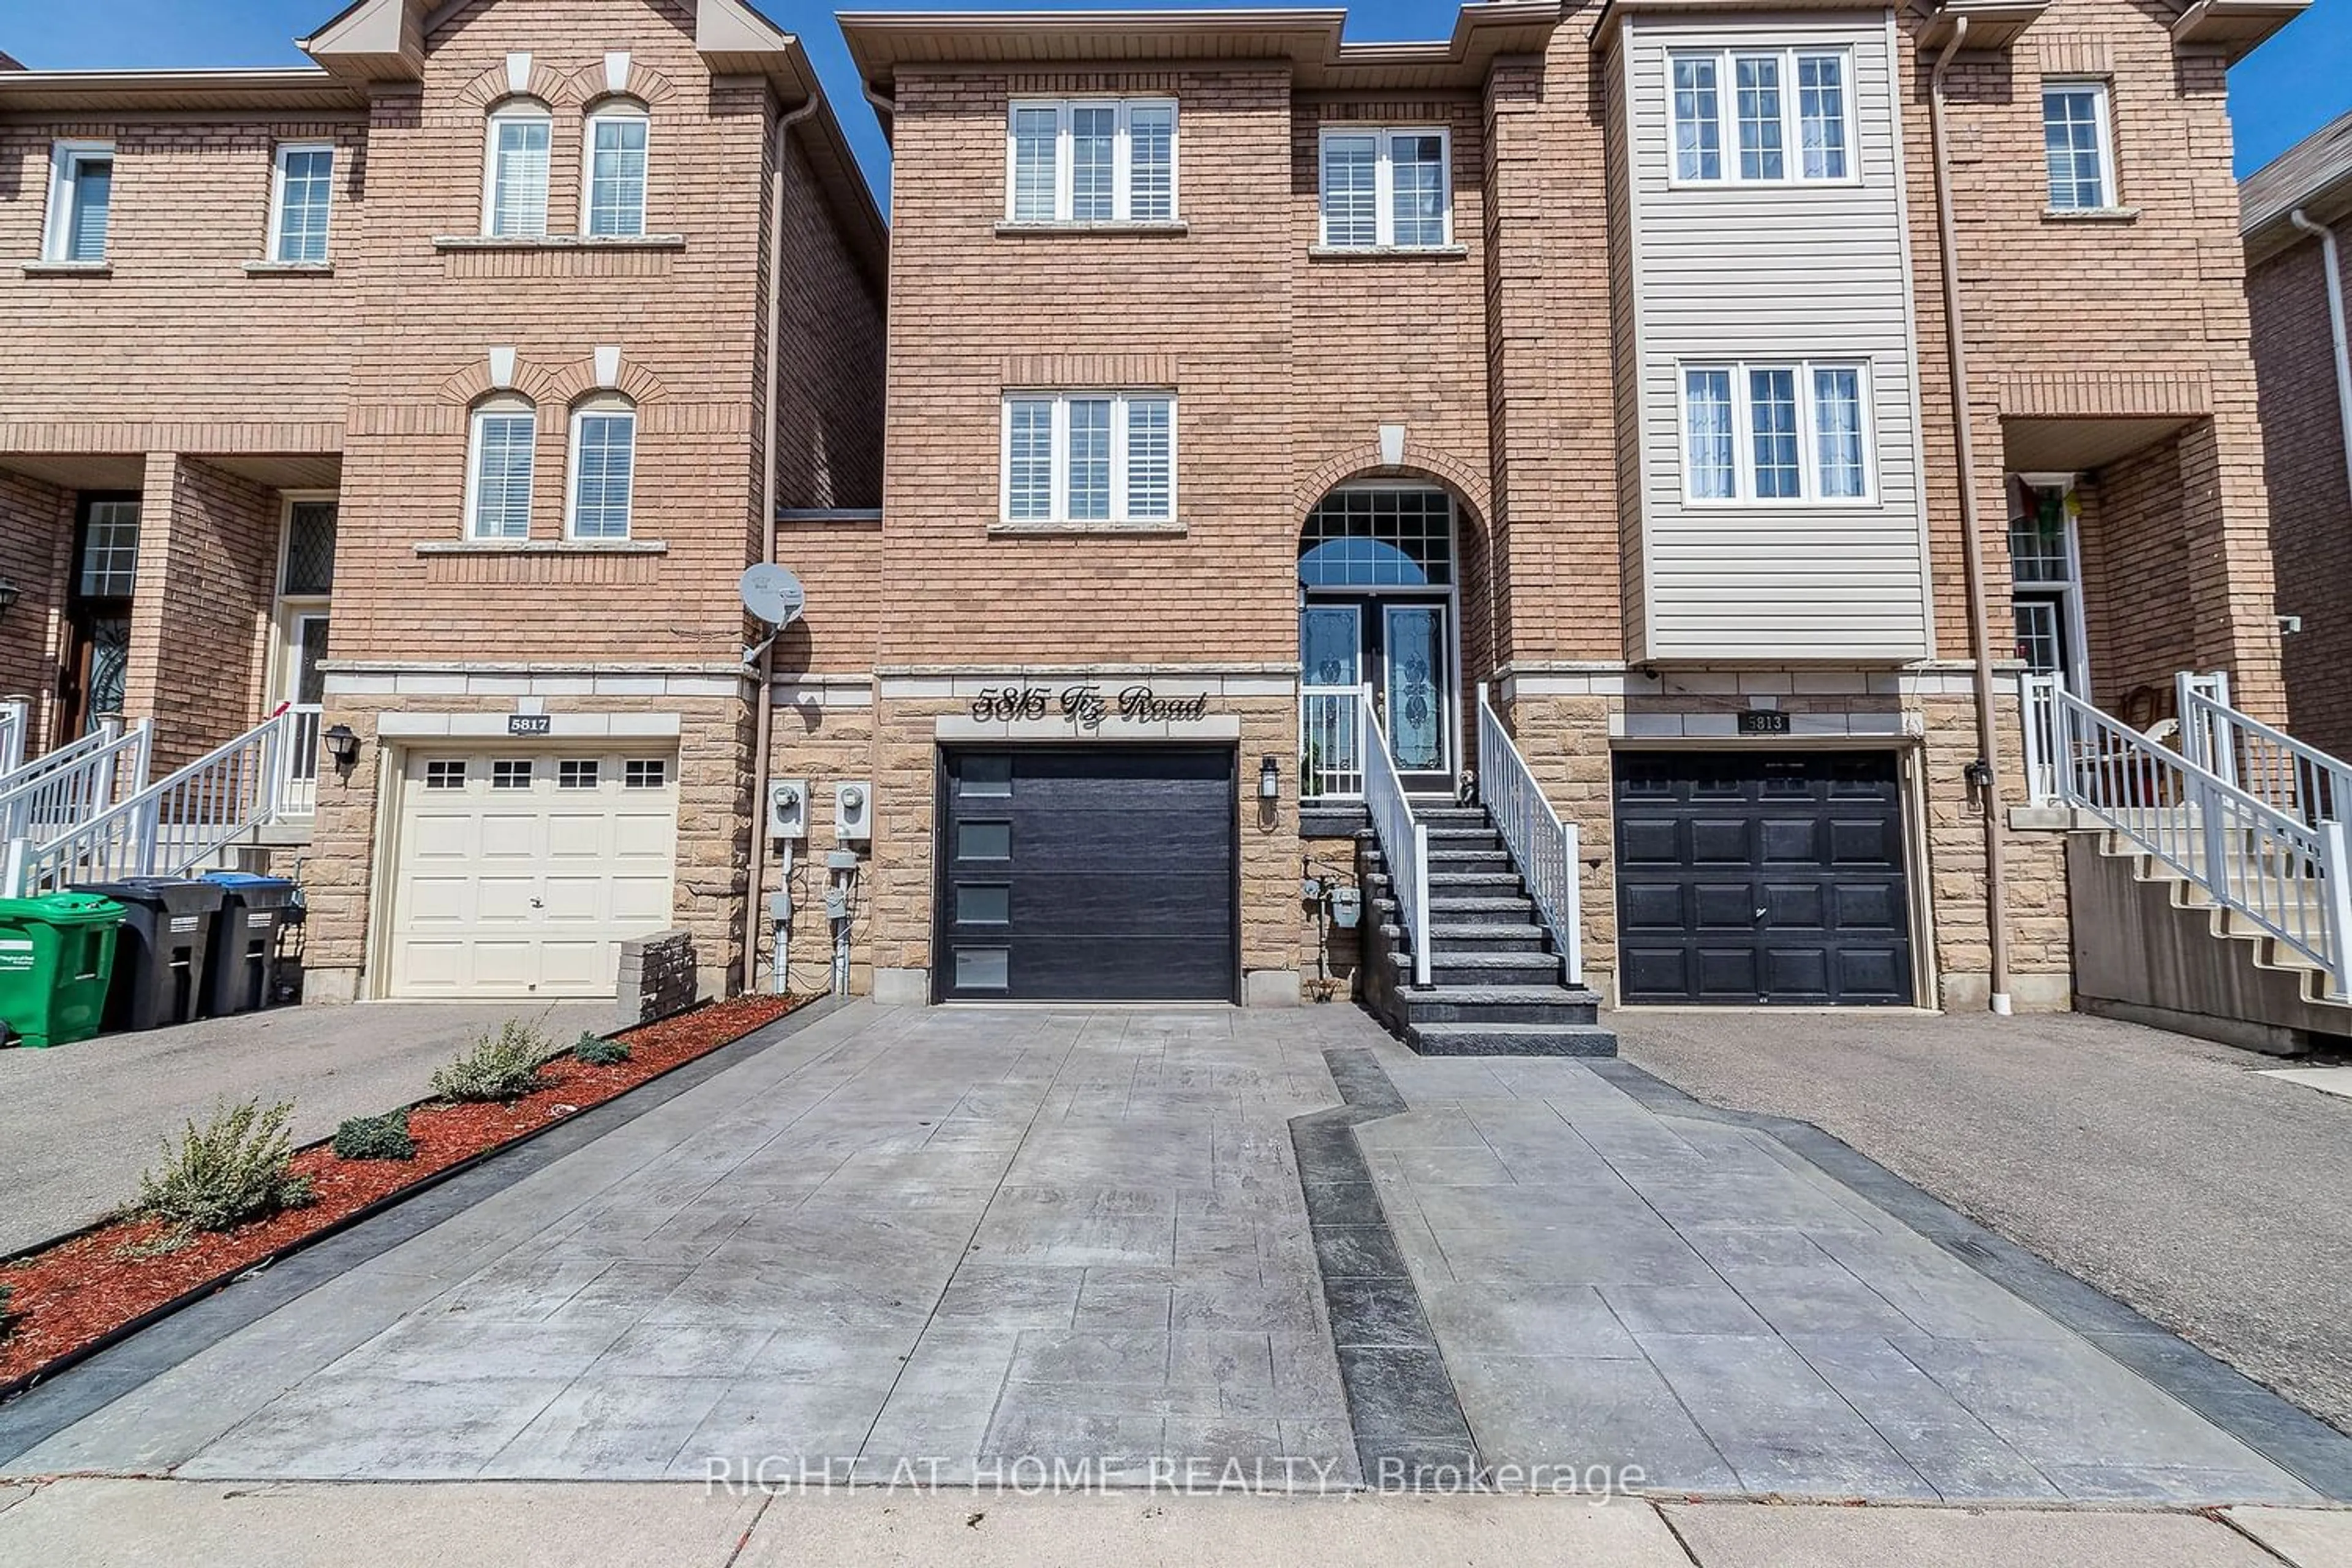 Home with brick exterior material for 5815 Tiz Rd, Mississauga Ontario L5R 0B6